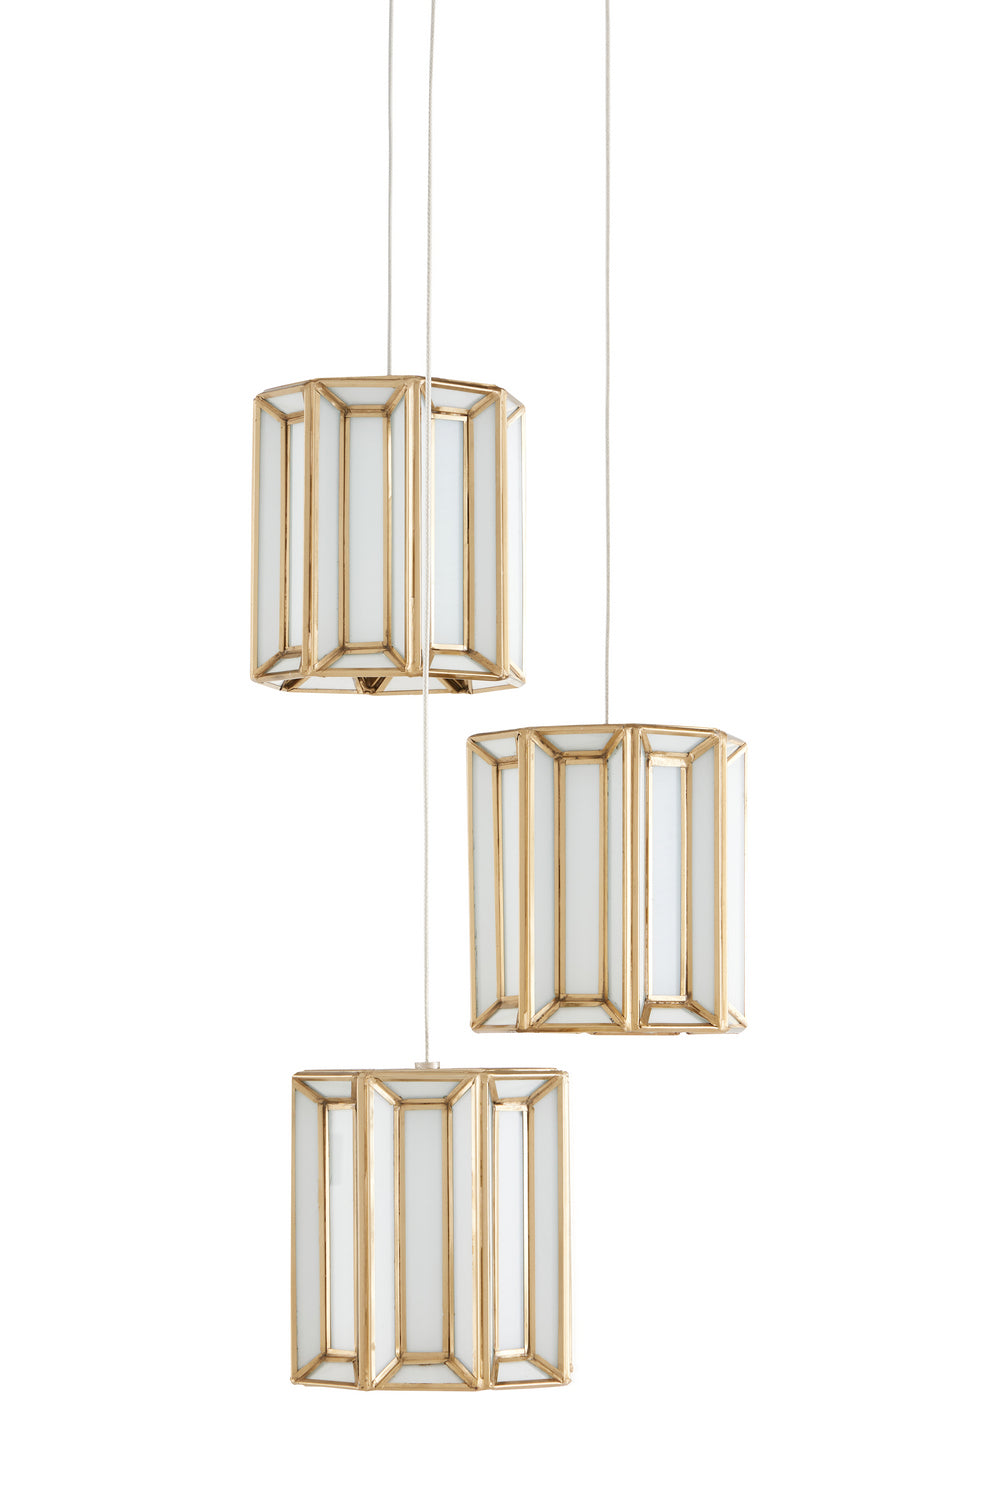 Three Light Pendant from the Daze collection in Antique Brass/White/Painted Silver finish